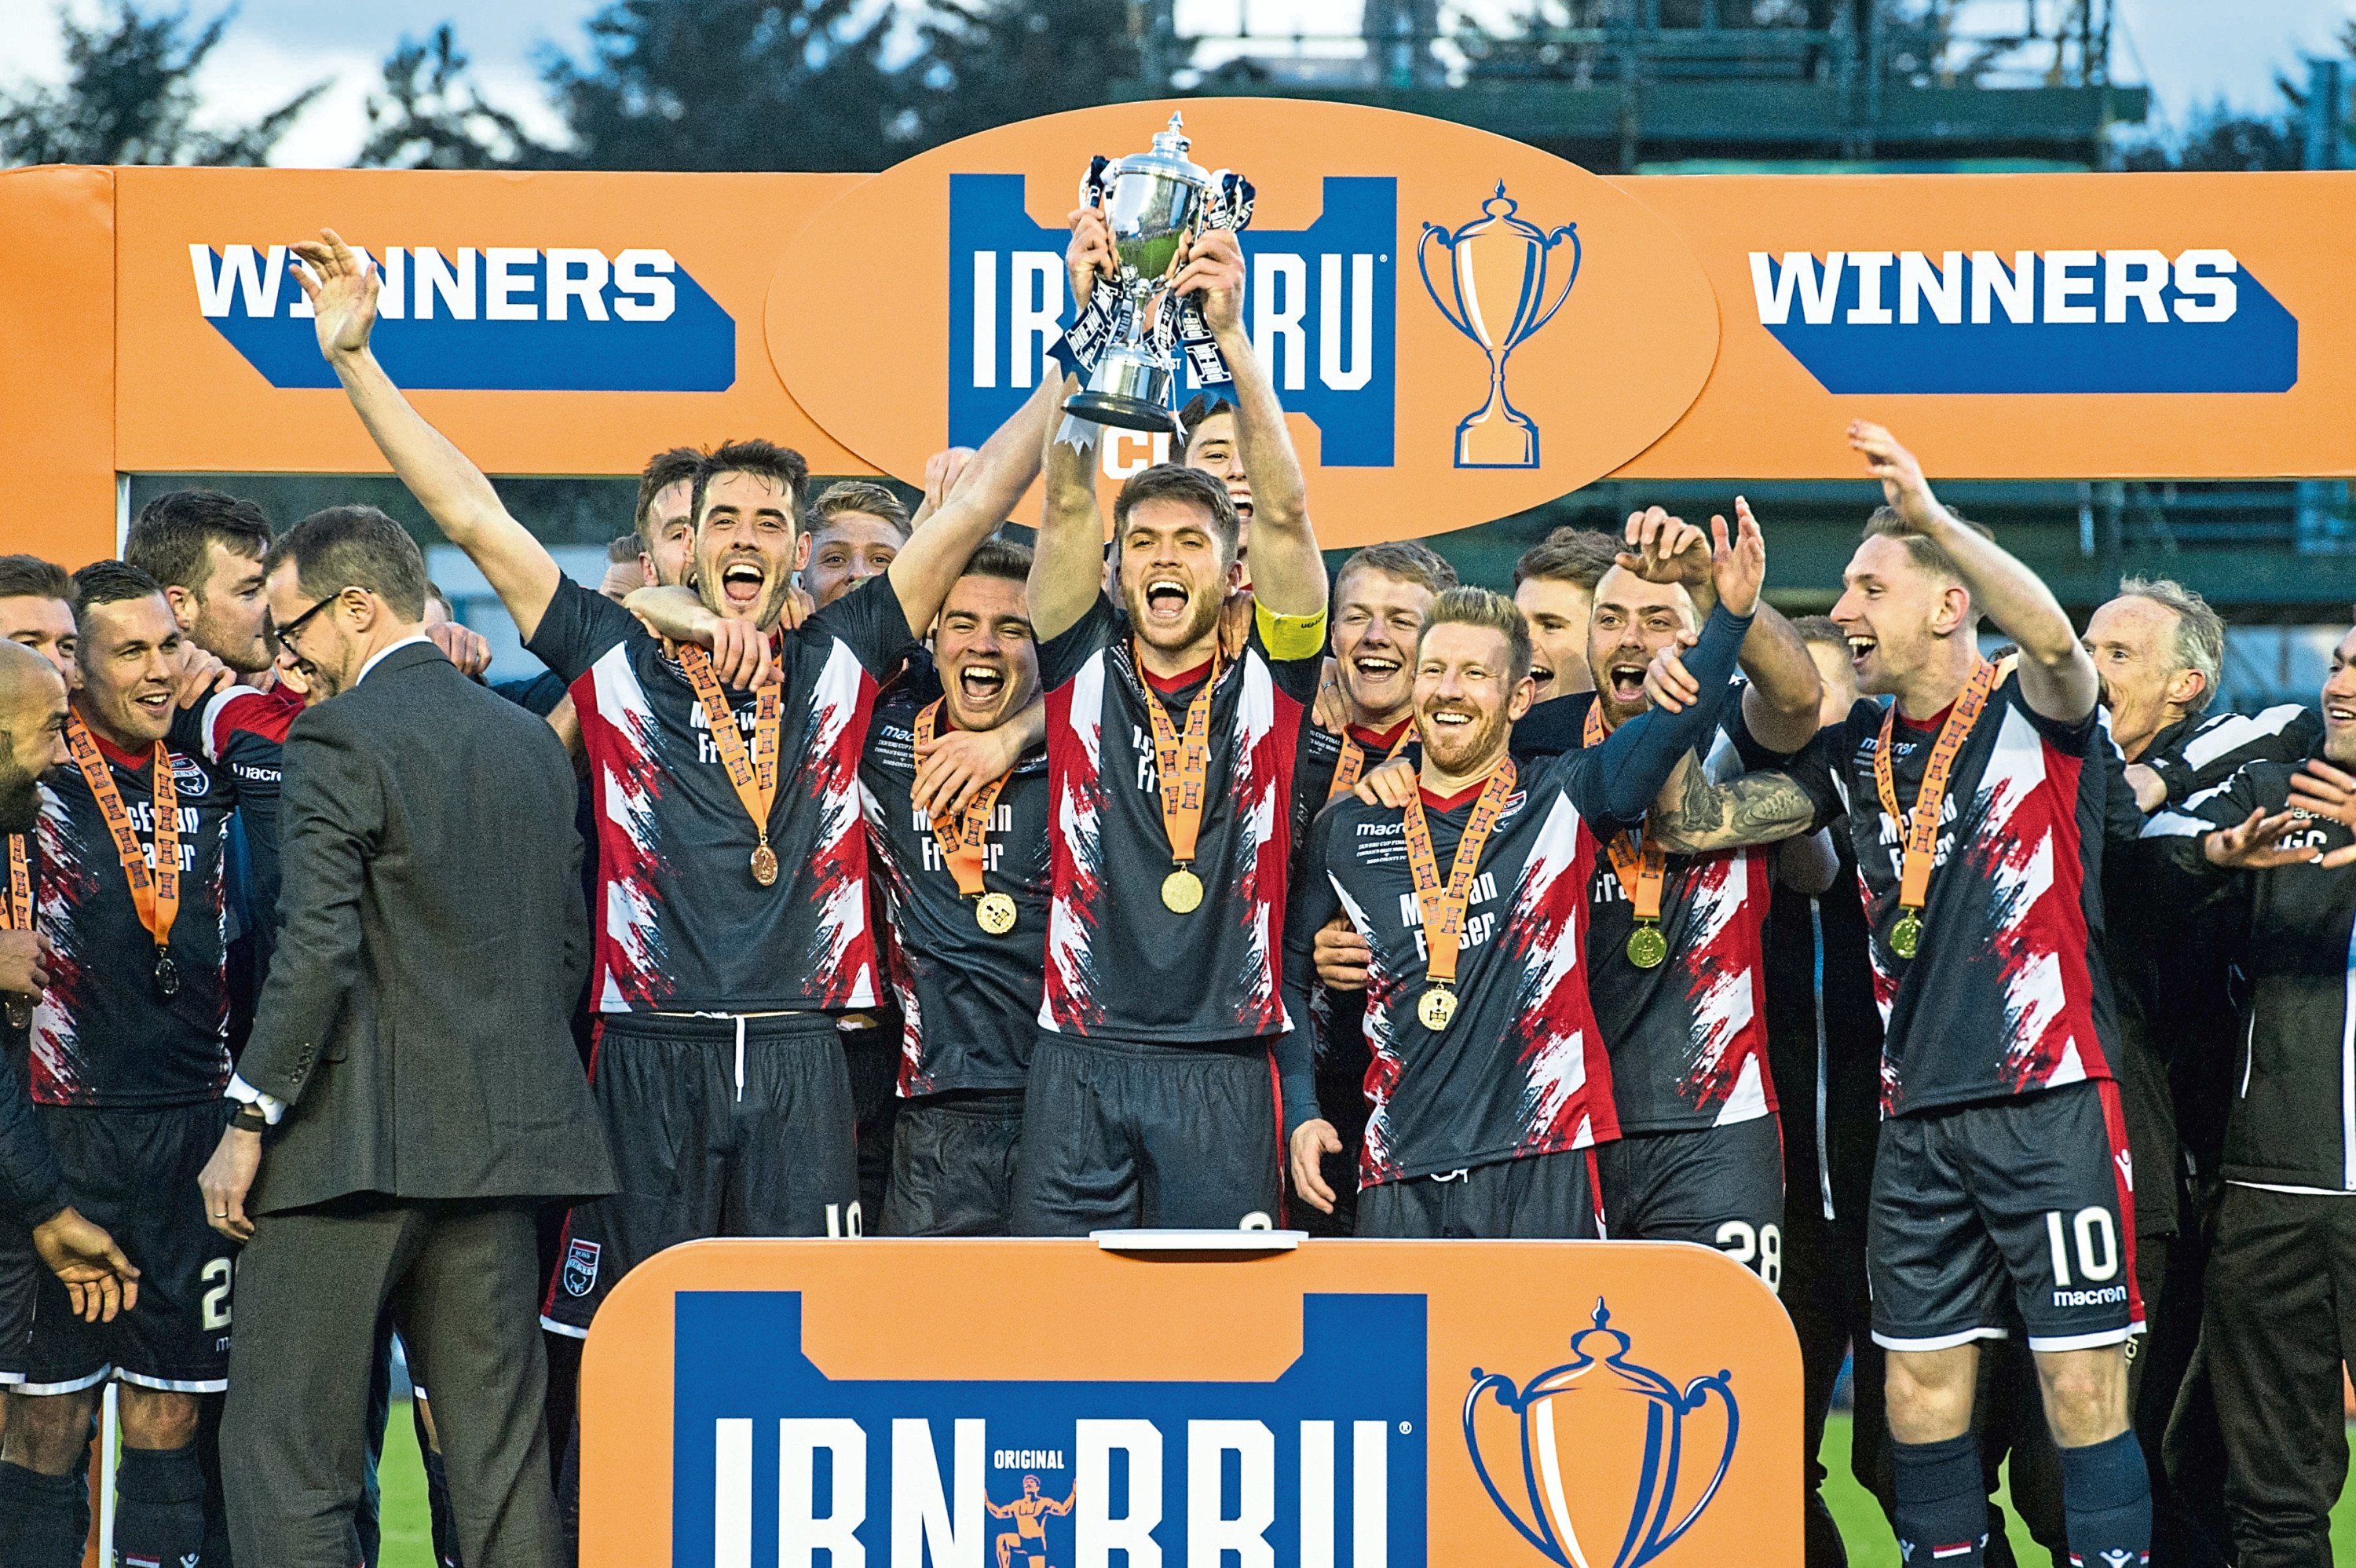 Ross County lift the 2018-19 IRN-BRU Cup.